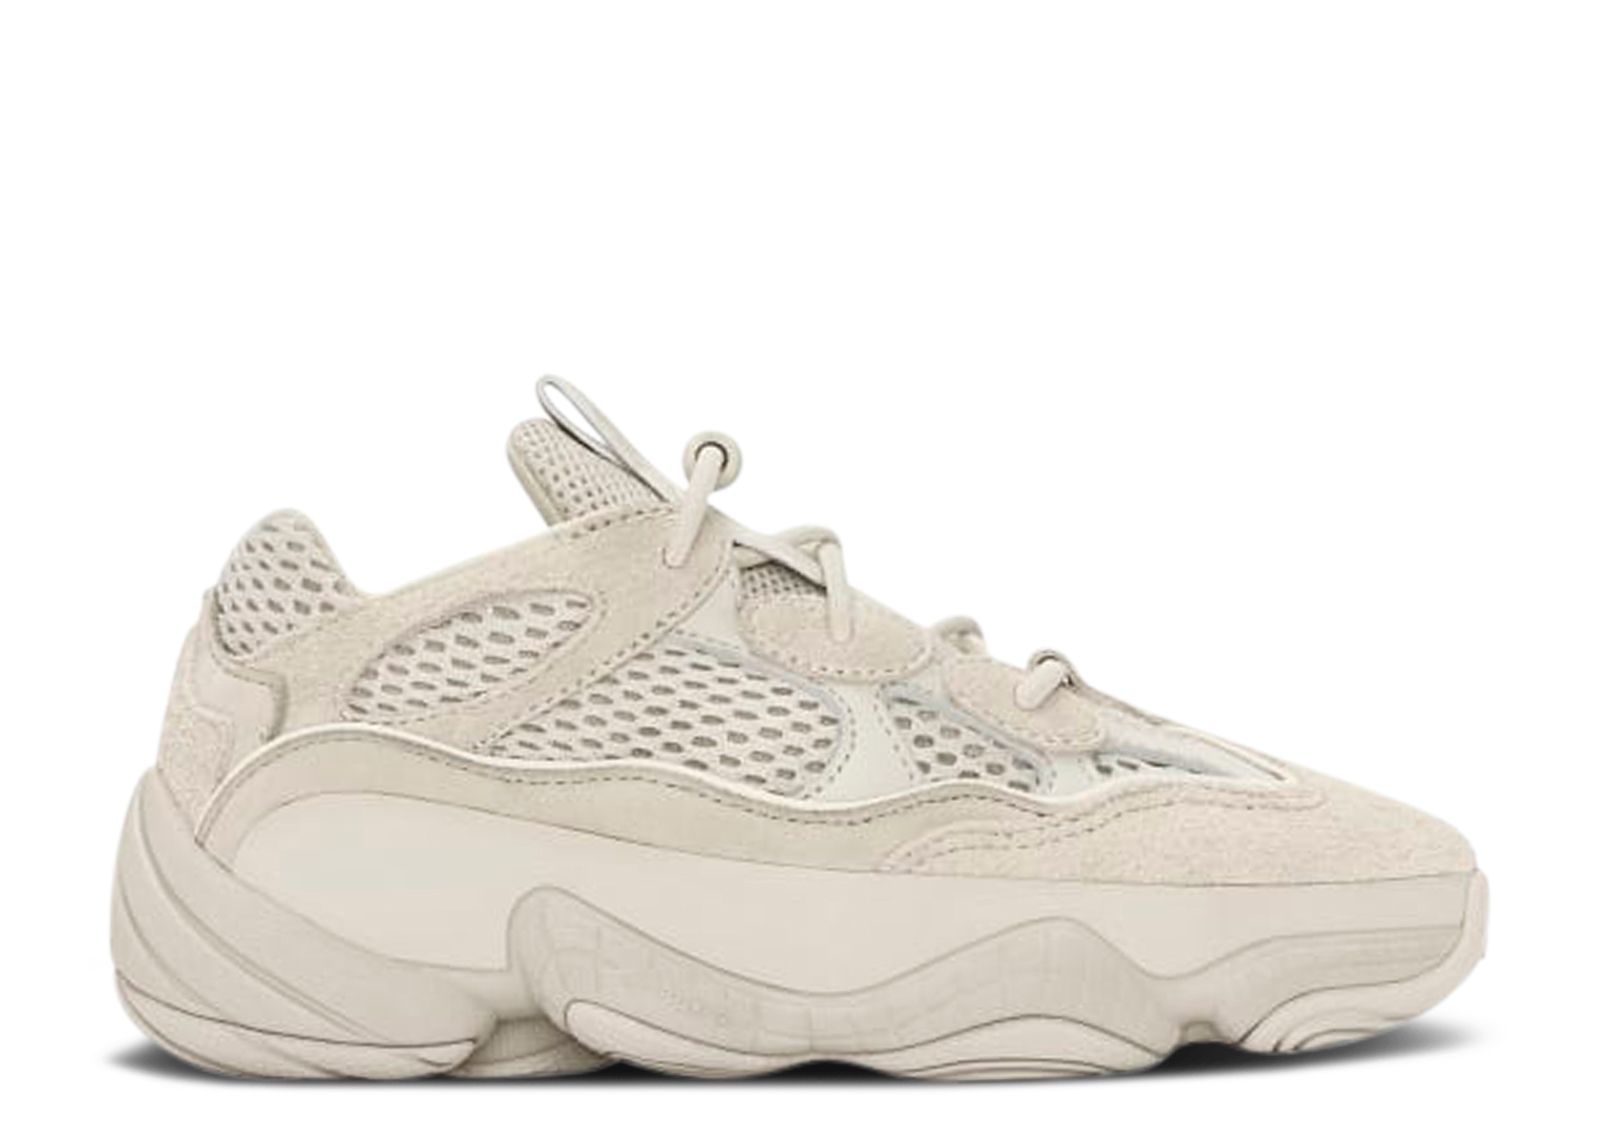 Completely dry Cherry Artist Adidas Yeezy Boost 500 Sneakers | Flight Club